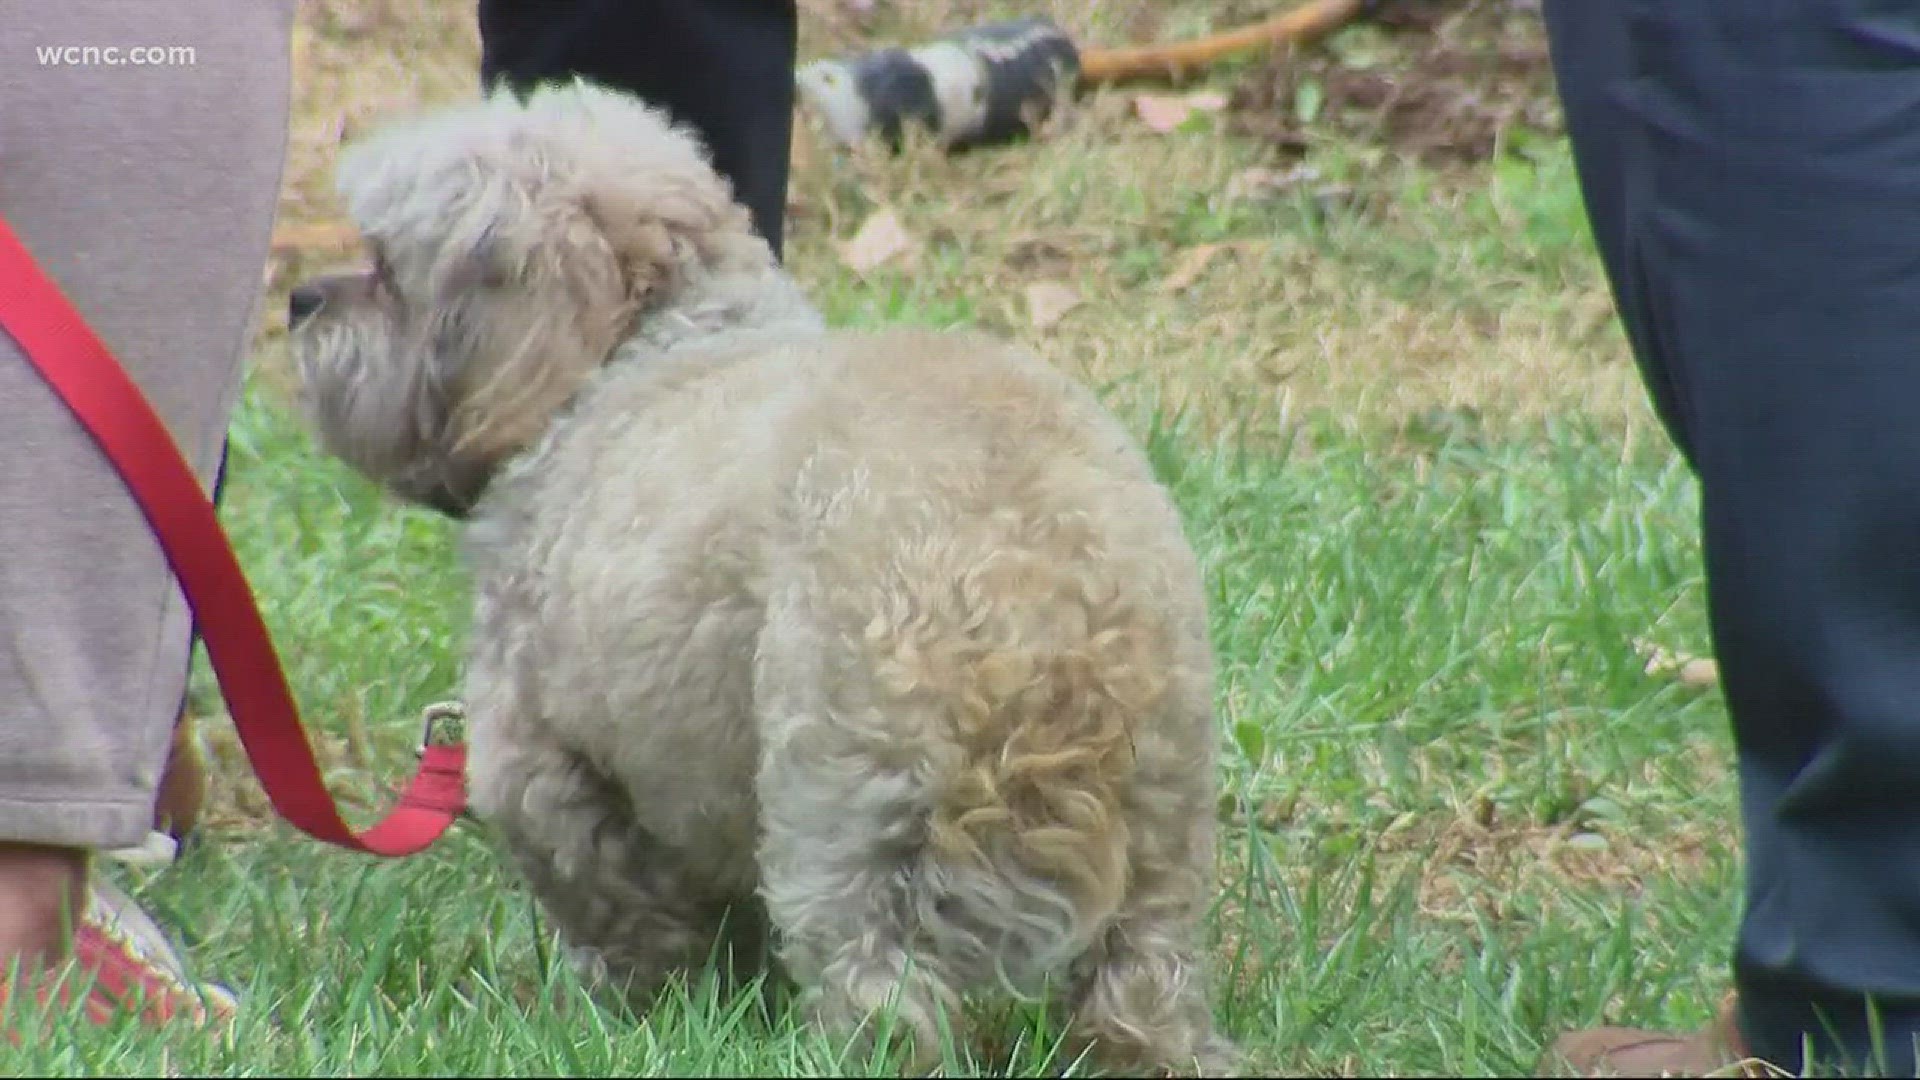 Dog rescued from house fire in east Charlotte